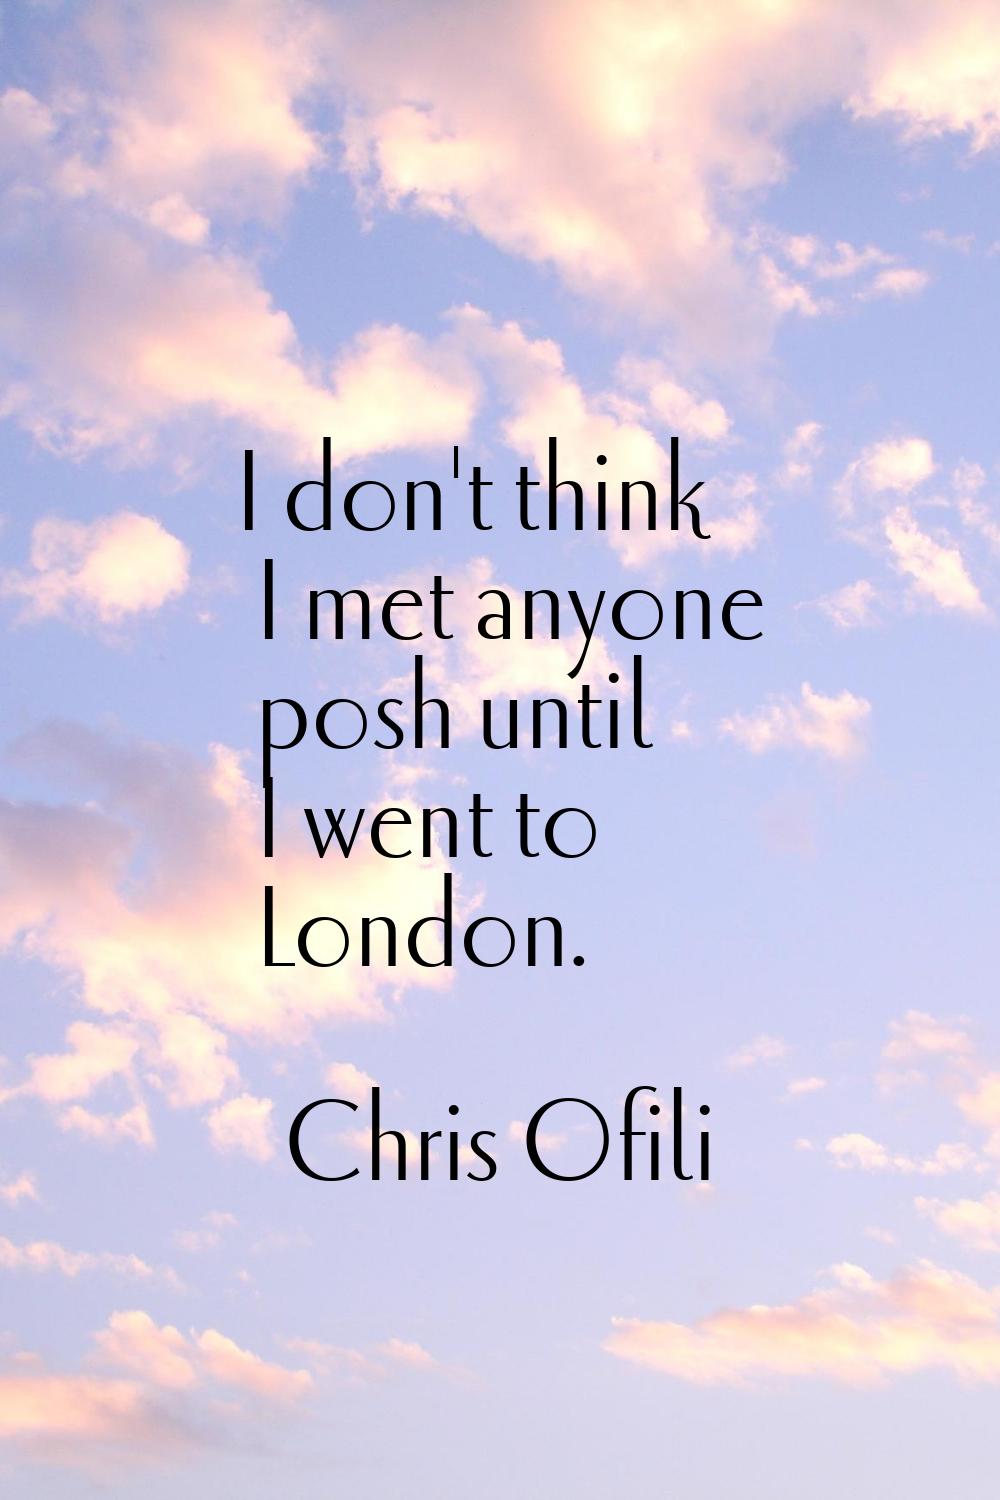 I don't think I met anyone posh until I went to London.